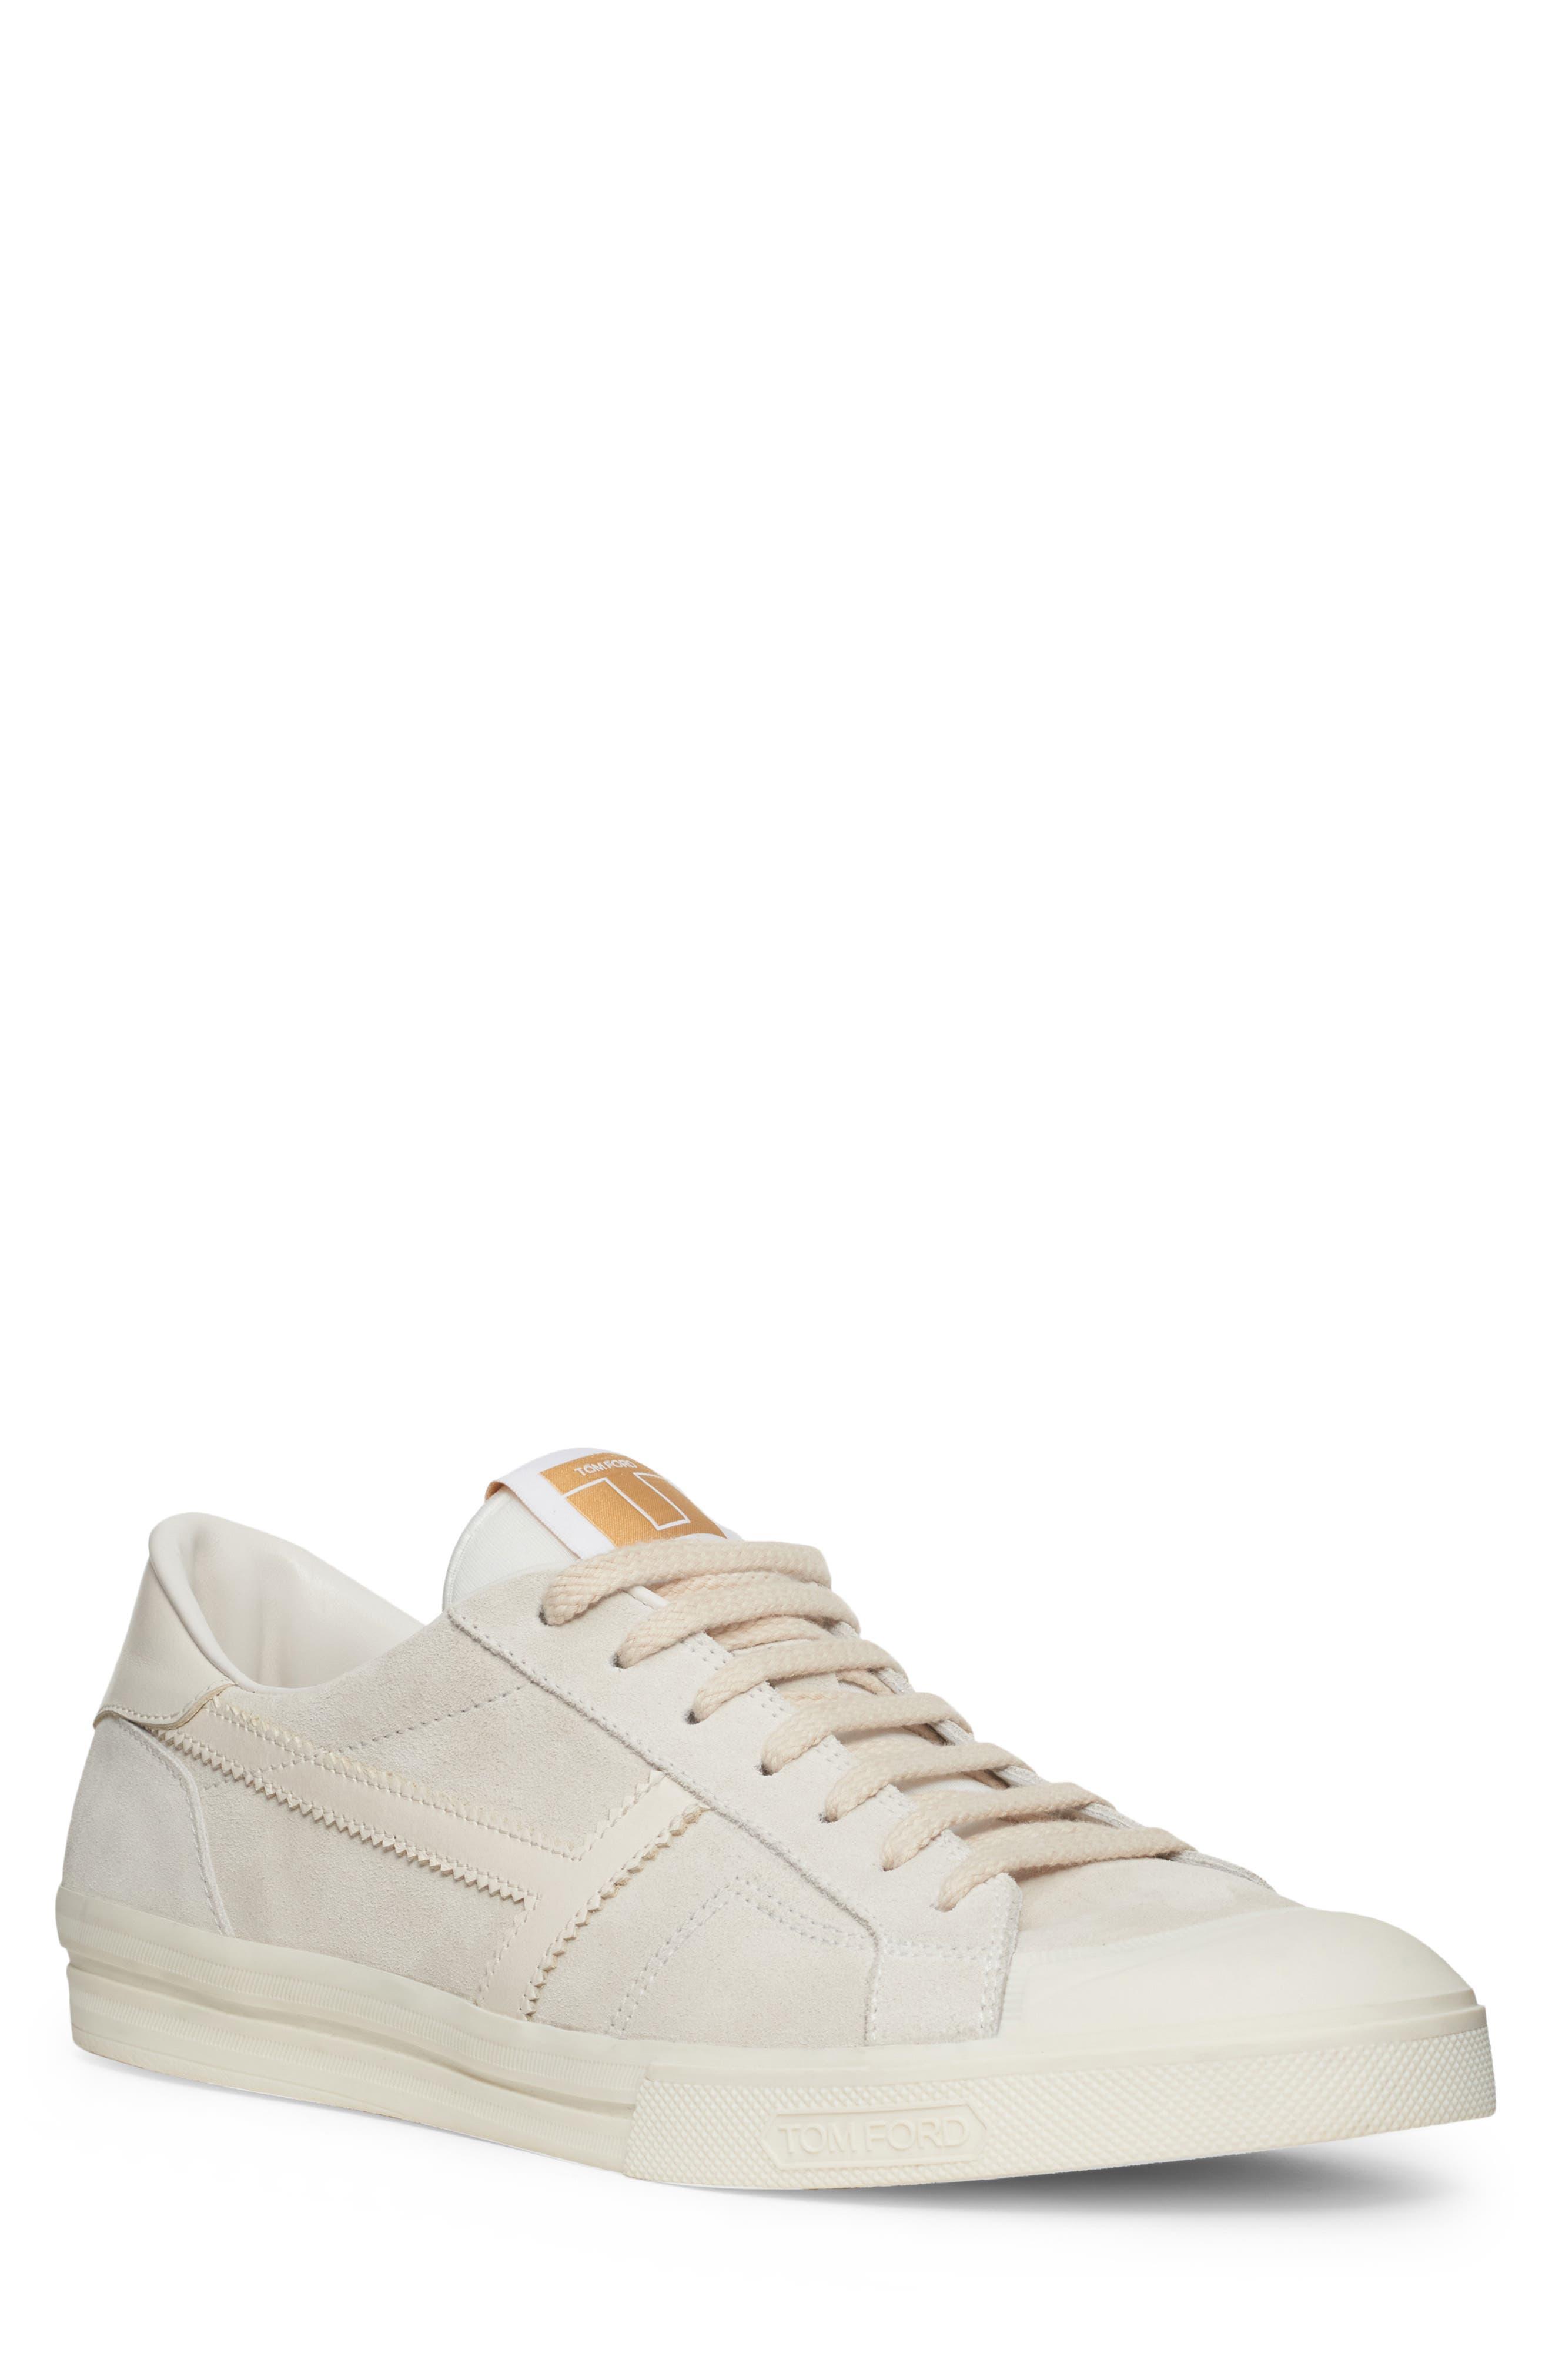 Tom Ford Jarvis Low Top Sneaker in White for Men | Lyst